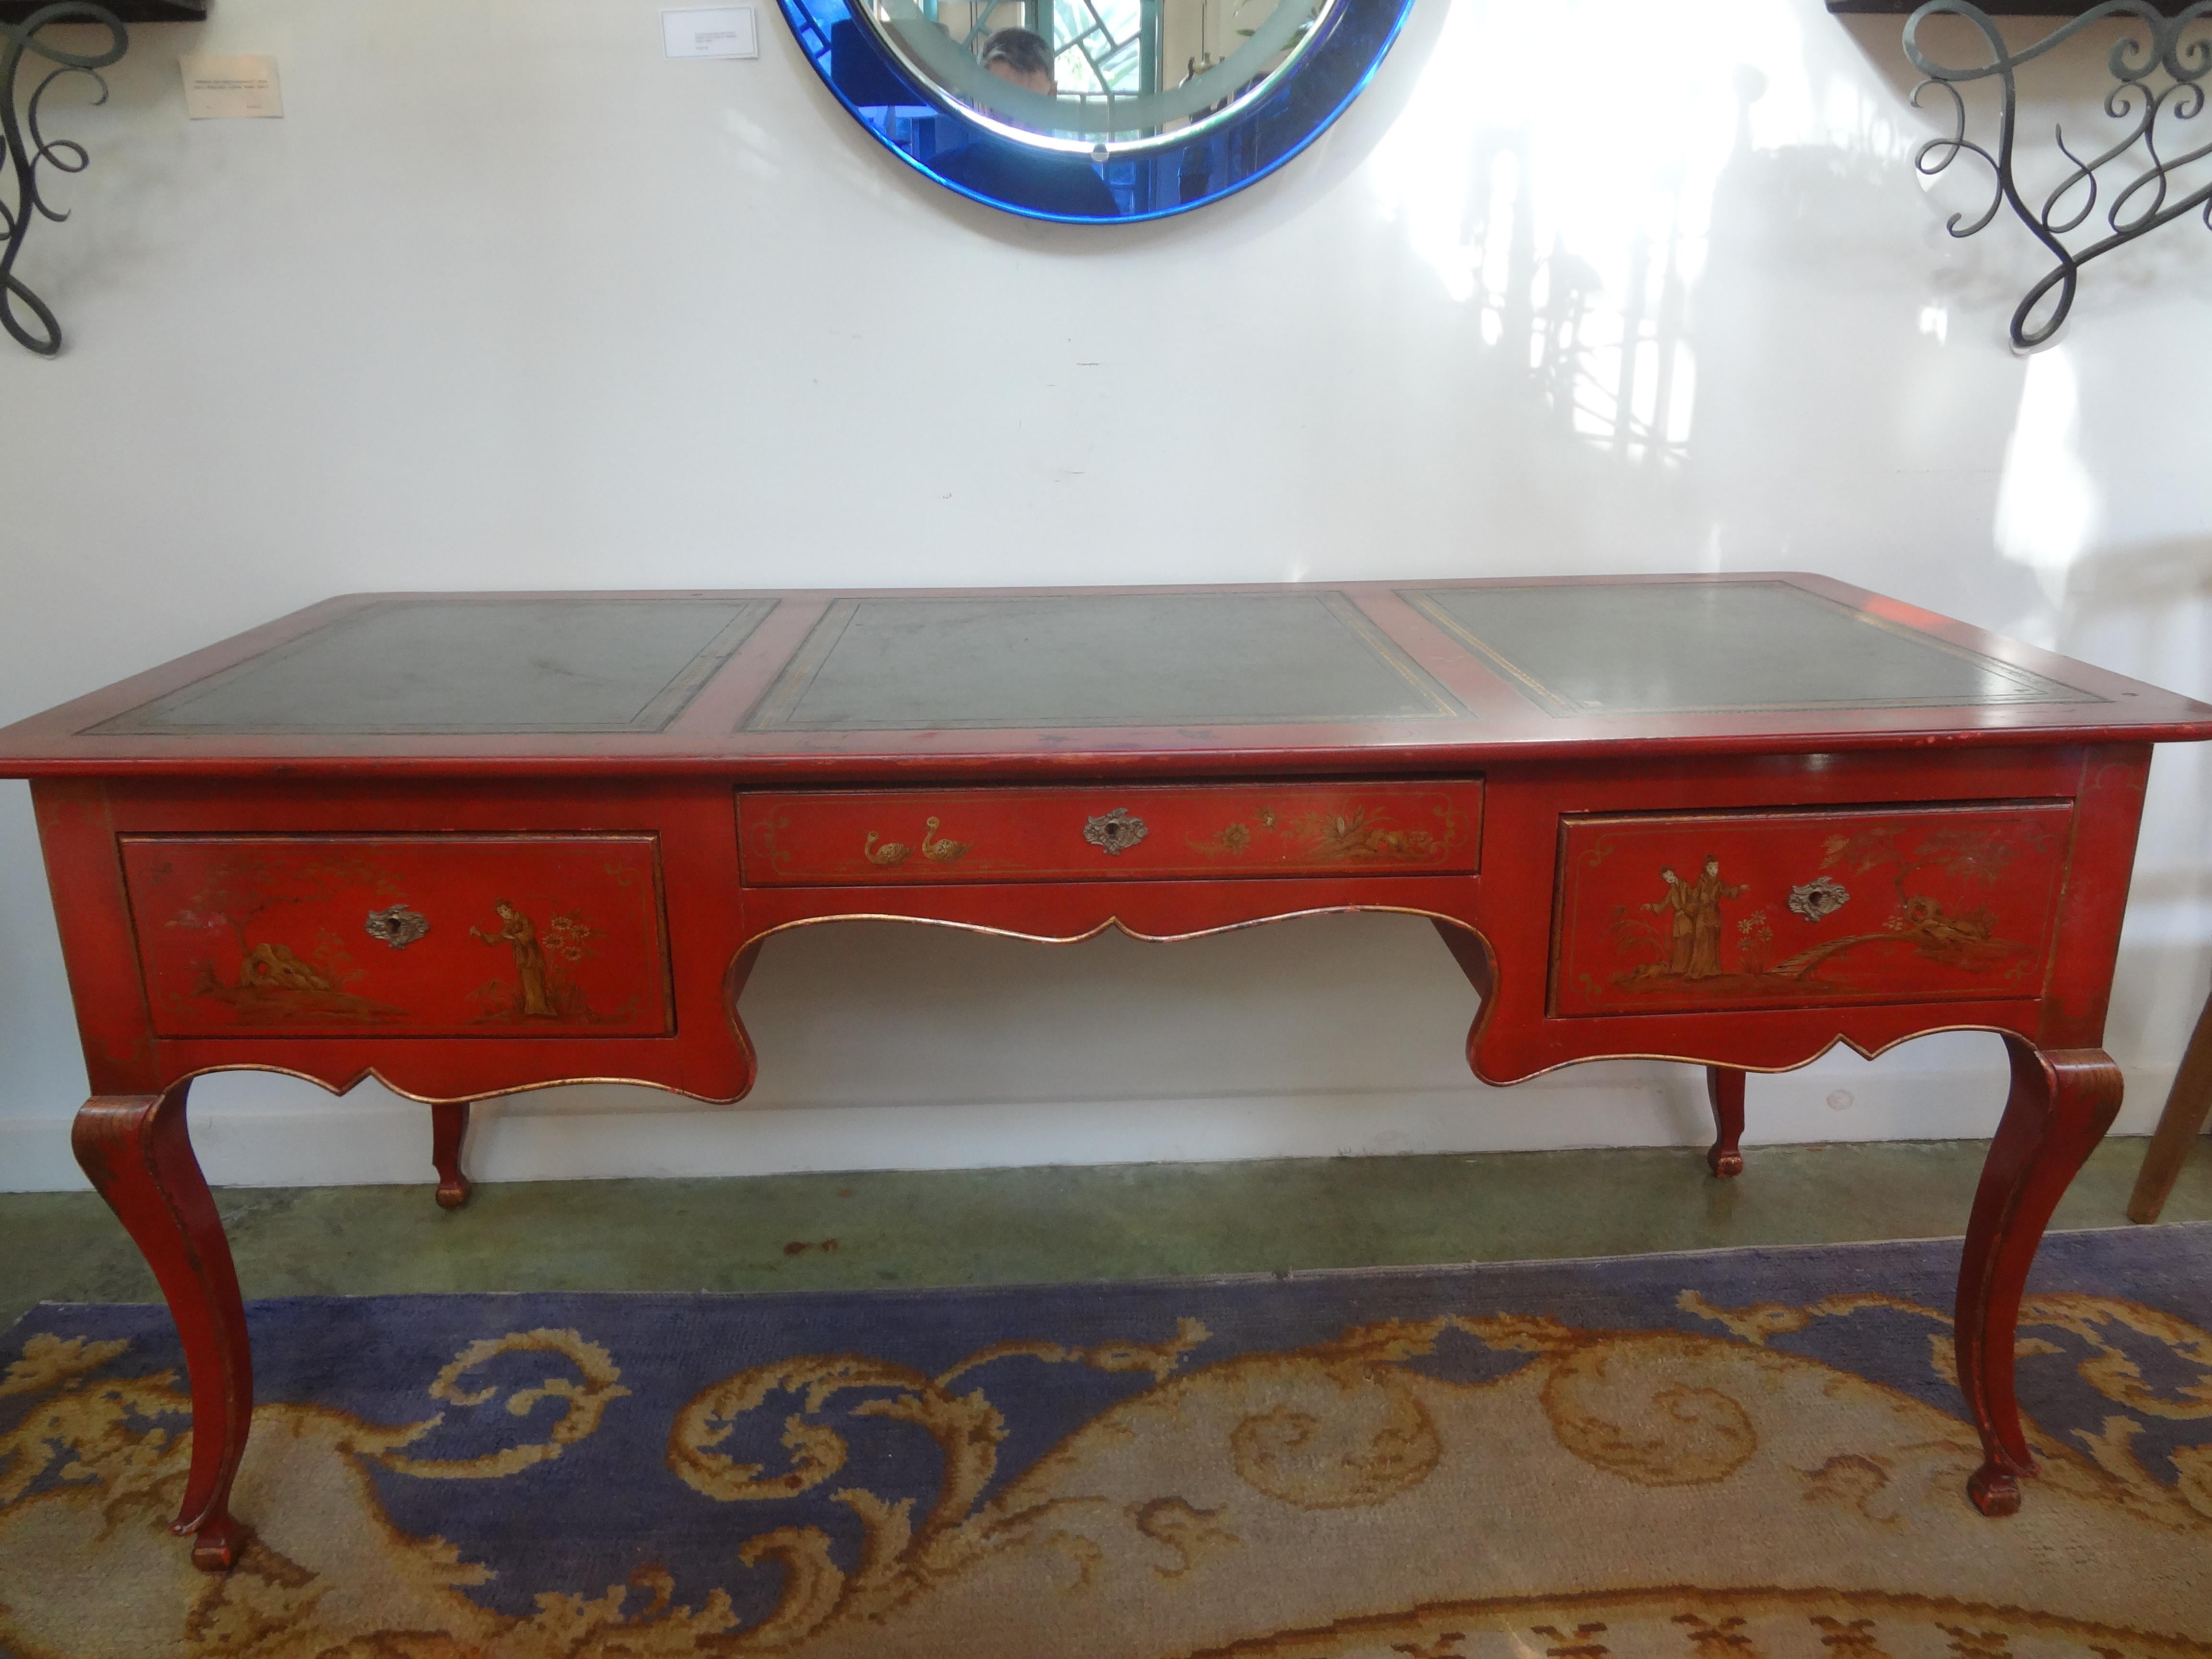 French Louis XV Style chinoiserie desk or Bureau plat By Baker.
Outstanding and unusual 20th century Baker Furniture Company French Louis XV style chinoiserie desk, writing table or bureau plat. This large beautiful desk is paint decorated on all